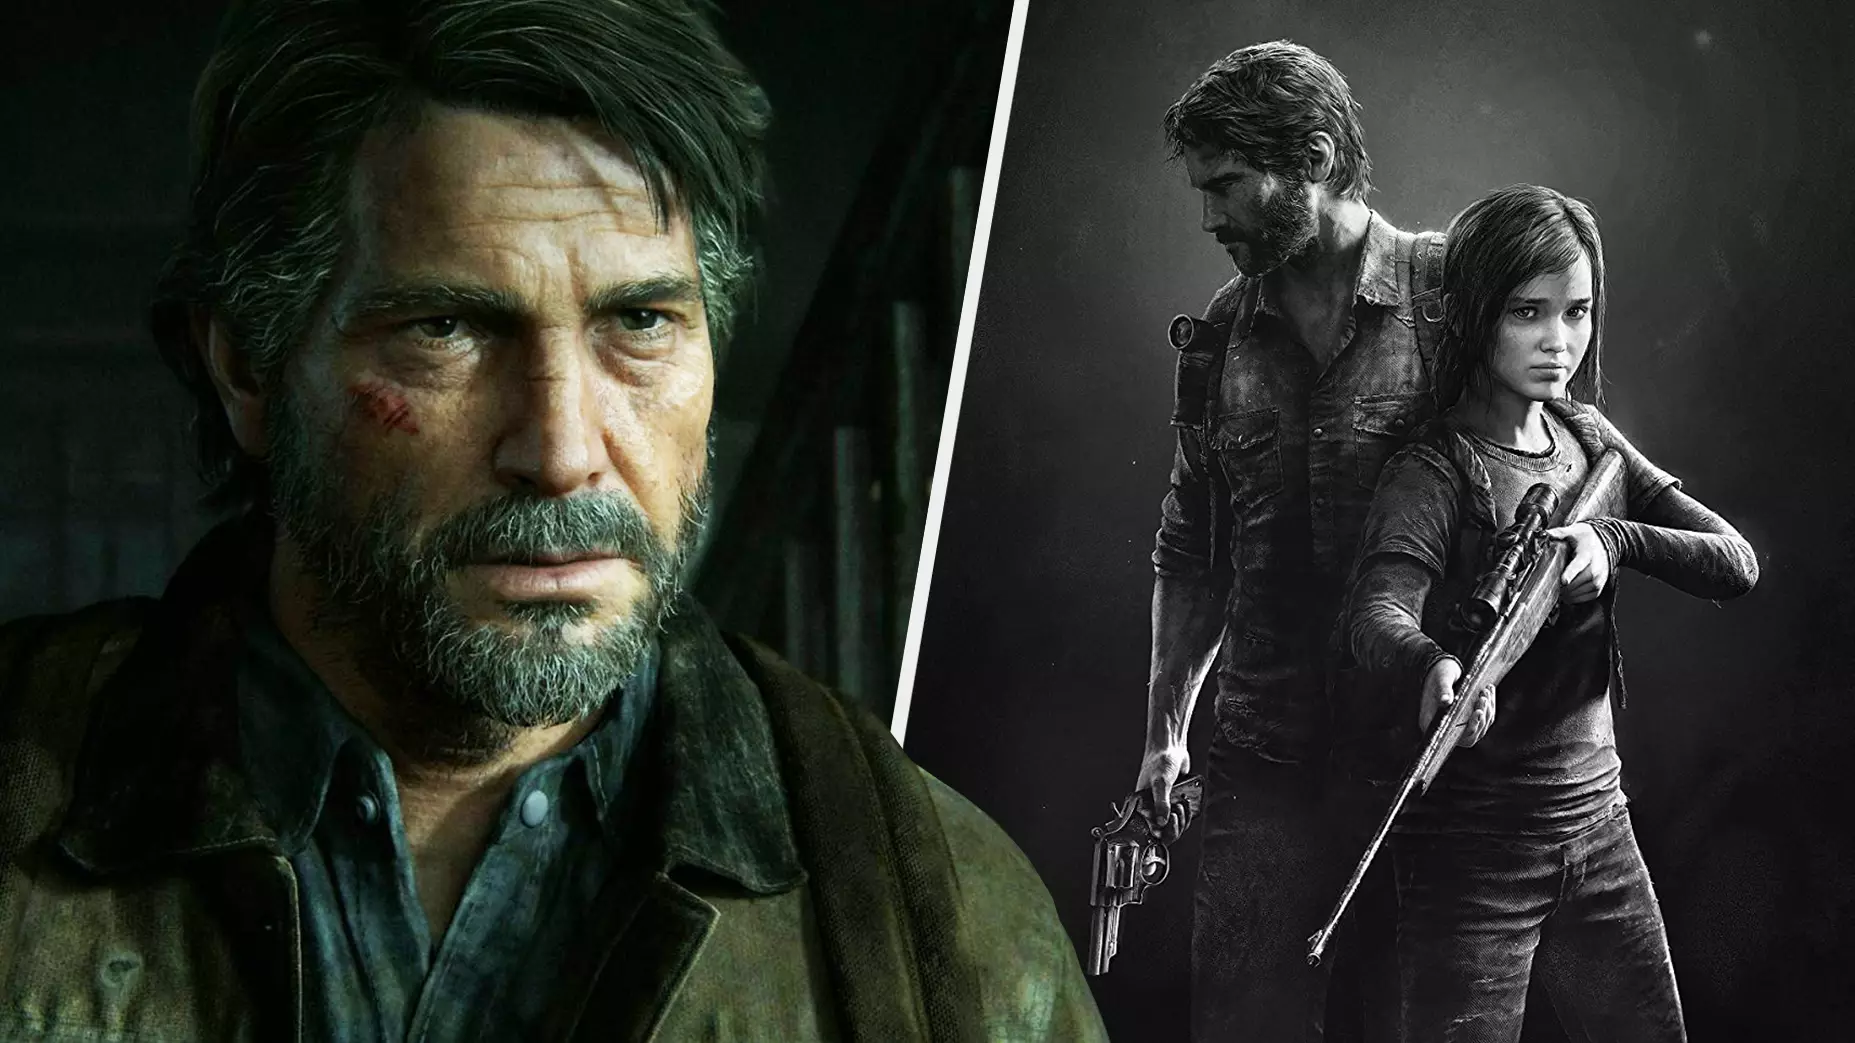 This is What Joel From 'The Last Of Us' Looks Like Without A Beard